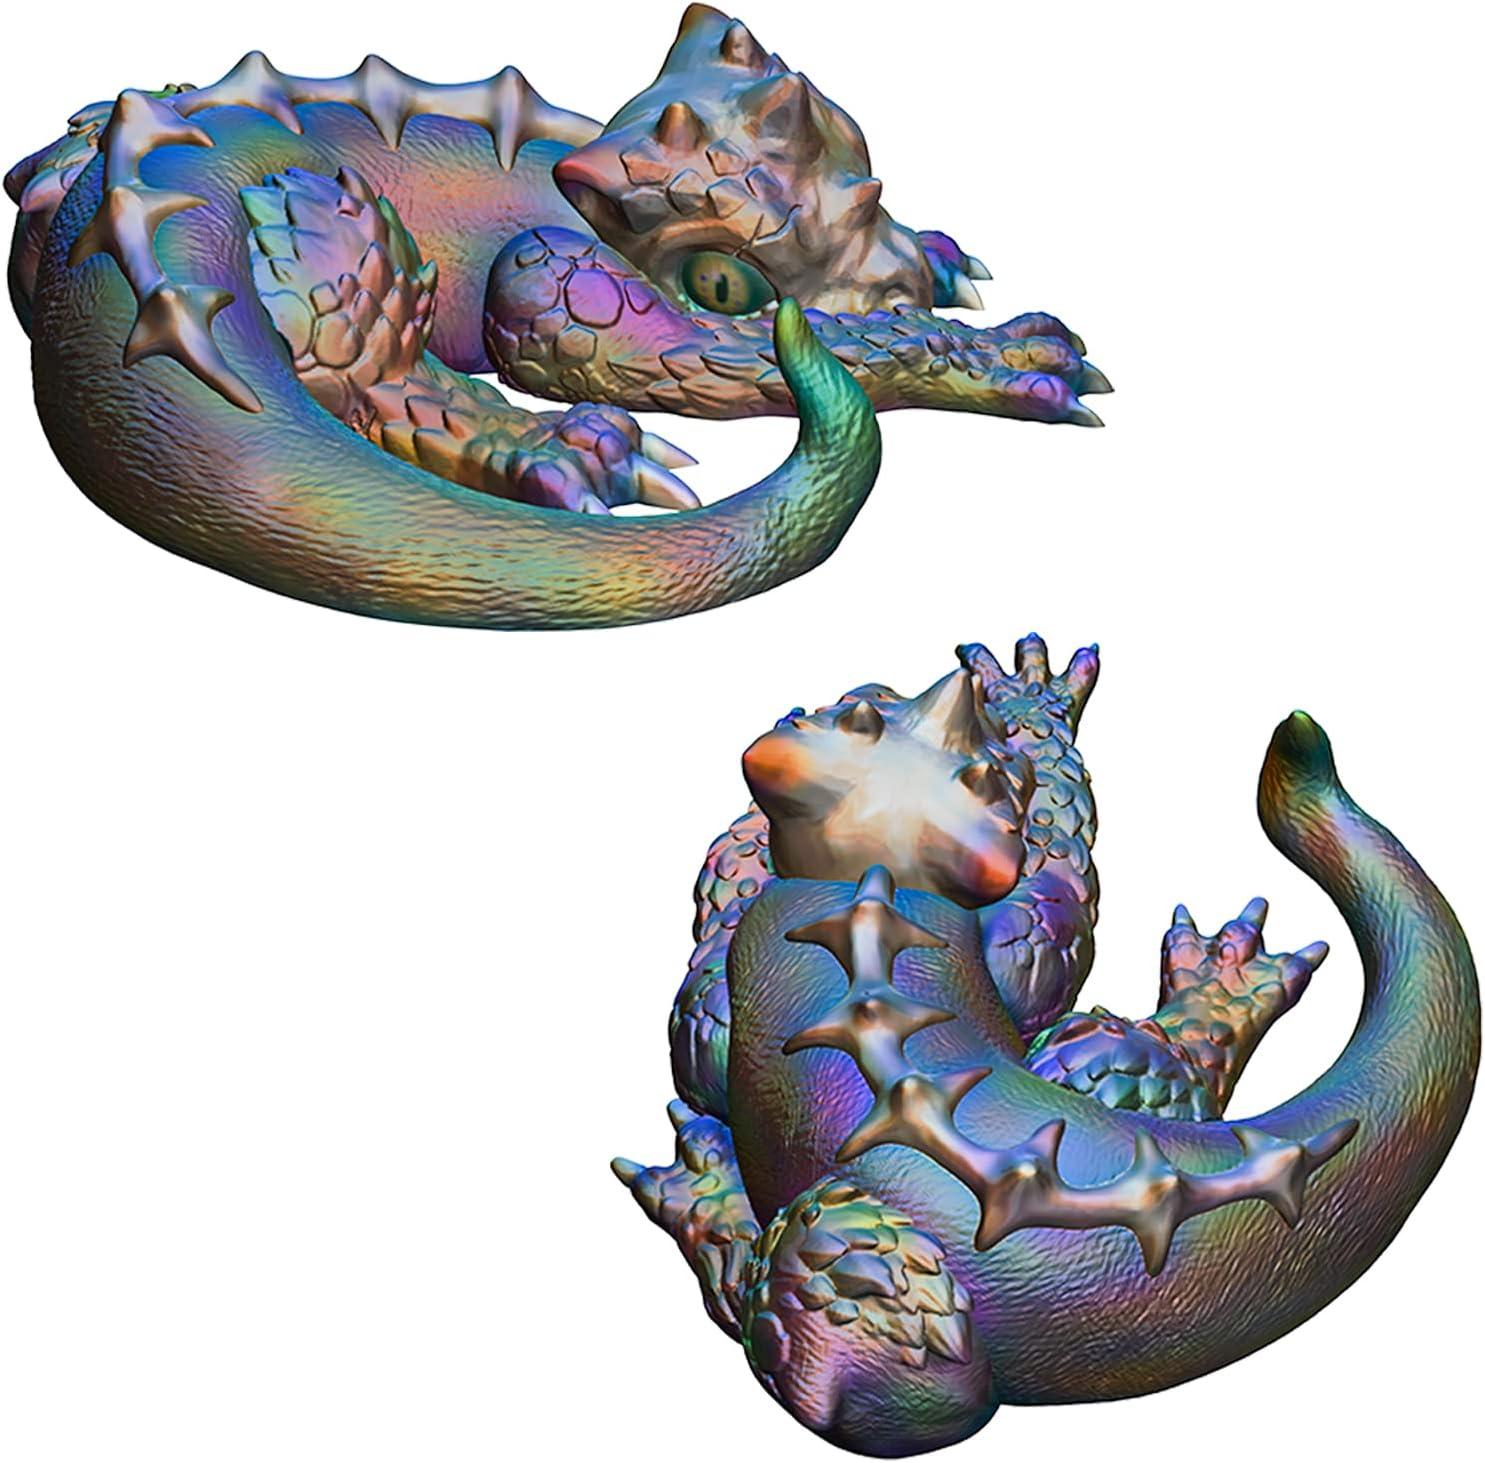 KAKIWYHHH Water Dragon 3D Epoxy Resin Silicone Mold for Fondant Sugar Craft Cake Topper Decorating Polymer Clay Plaster